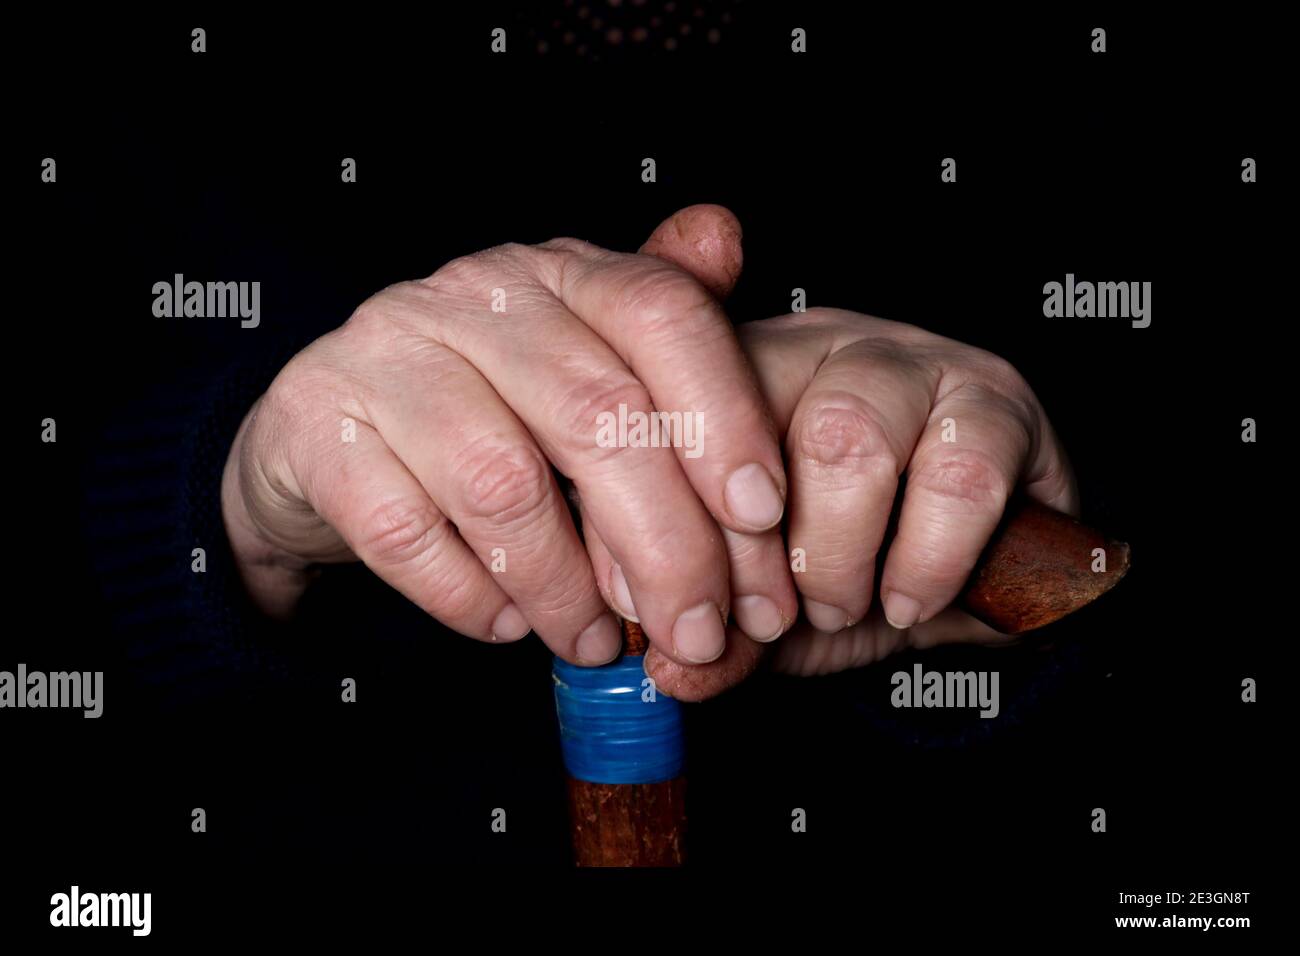 Elderly woman's hands on an old walking stick with t shaped handles. The concept of old age, loneliness, solicitude and caring for the elderly. Stock Photo